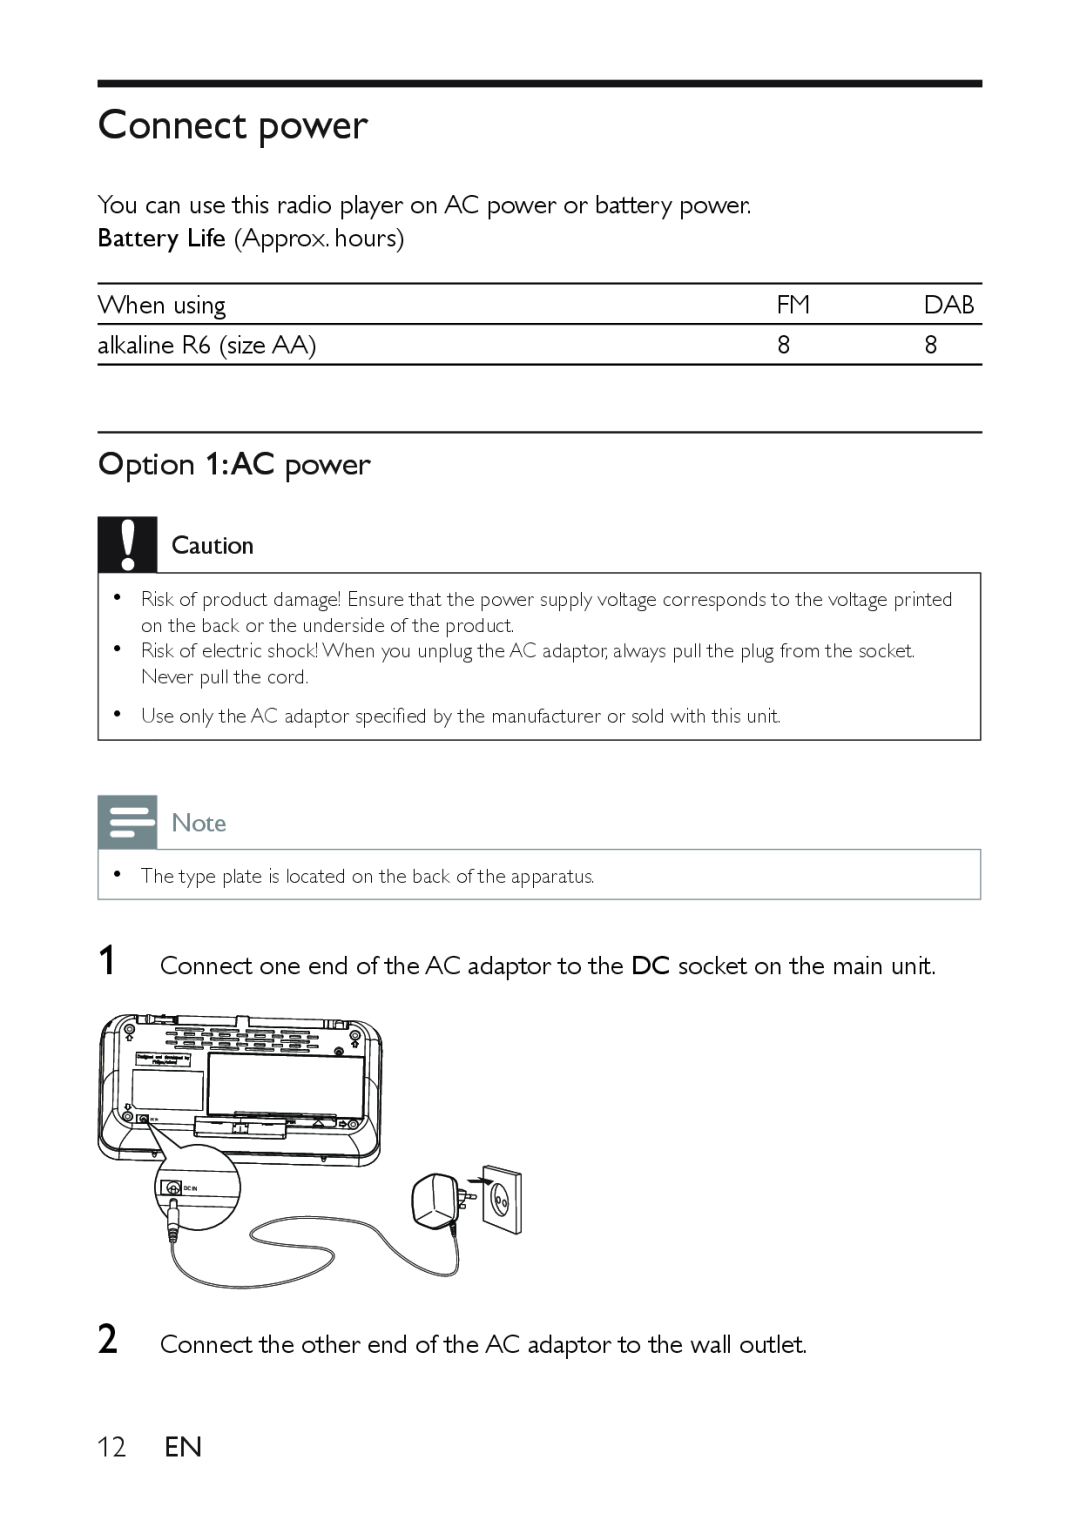 Philips AE9011 user manual Connect power, Option 1 AC power 